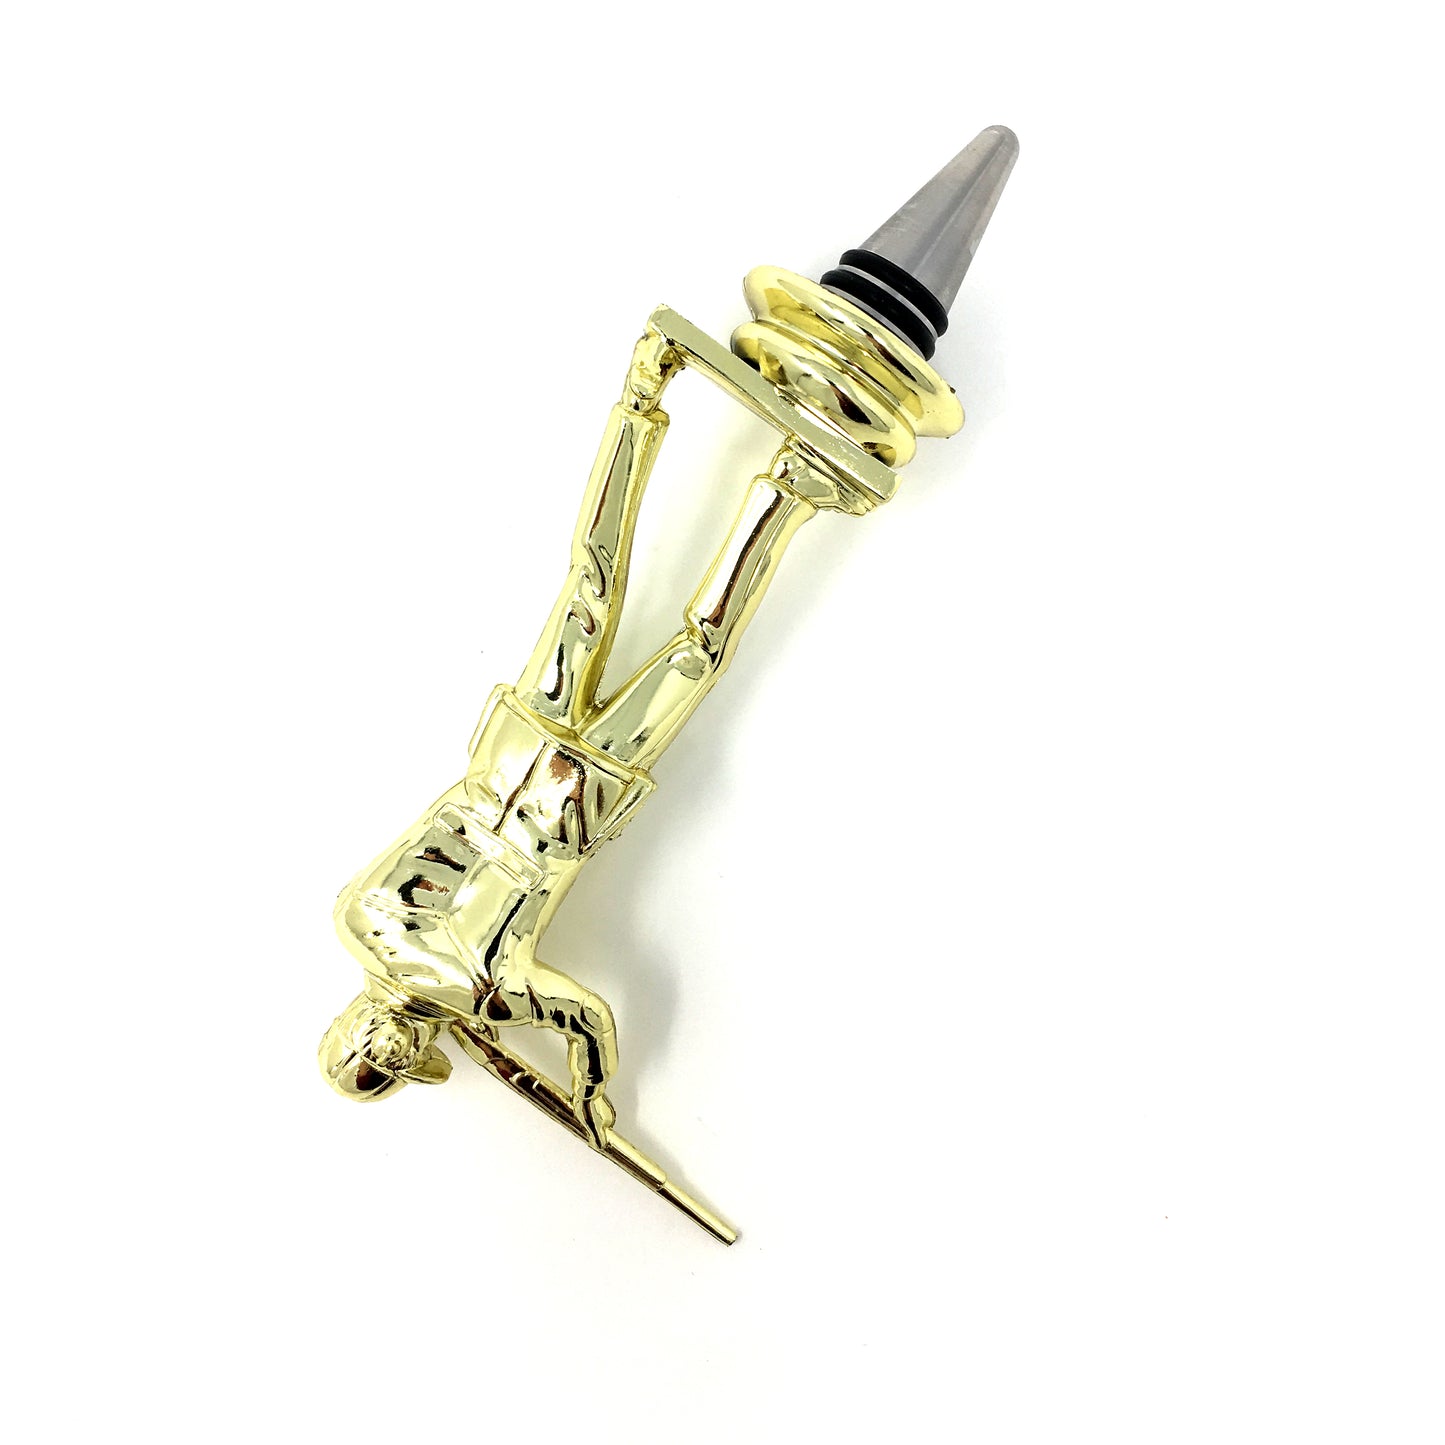 Hunter Trophy Wine Bottle Stopper with Stainless Steel Base